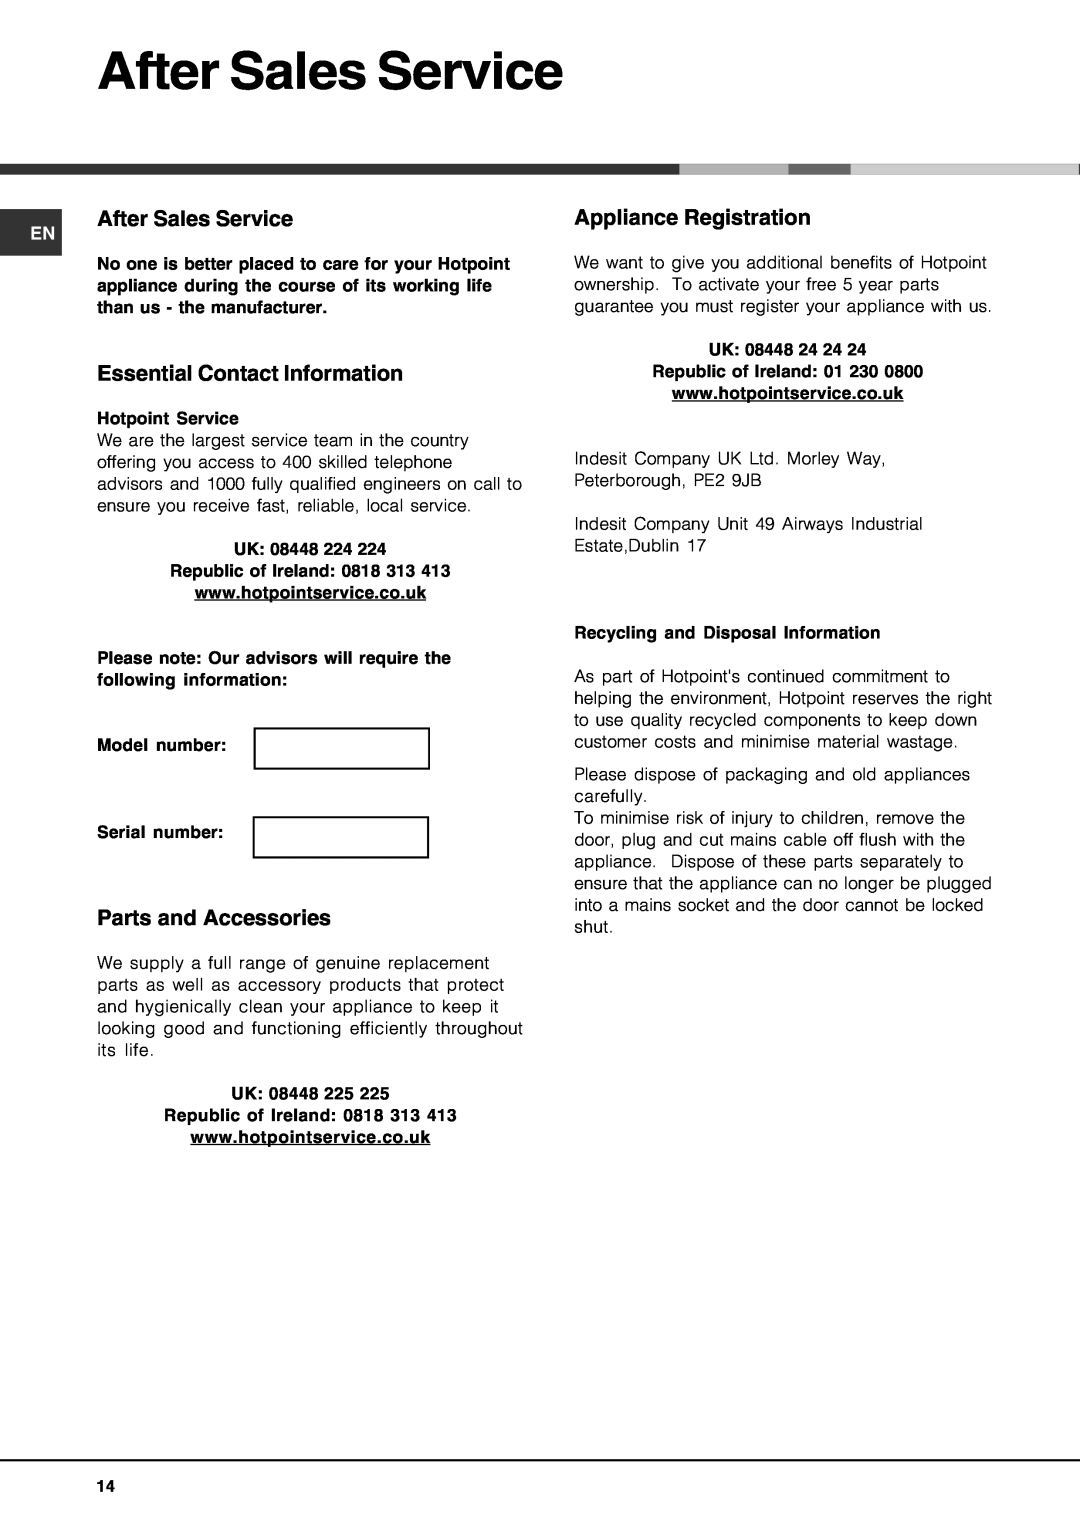 Hotpoint LFT 228 manual After Sales Service, Essential Contact Information, Parts and Accessories, Appliance Registration 